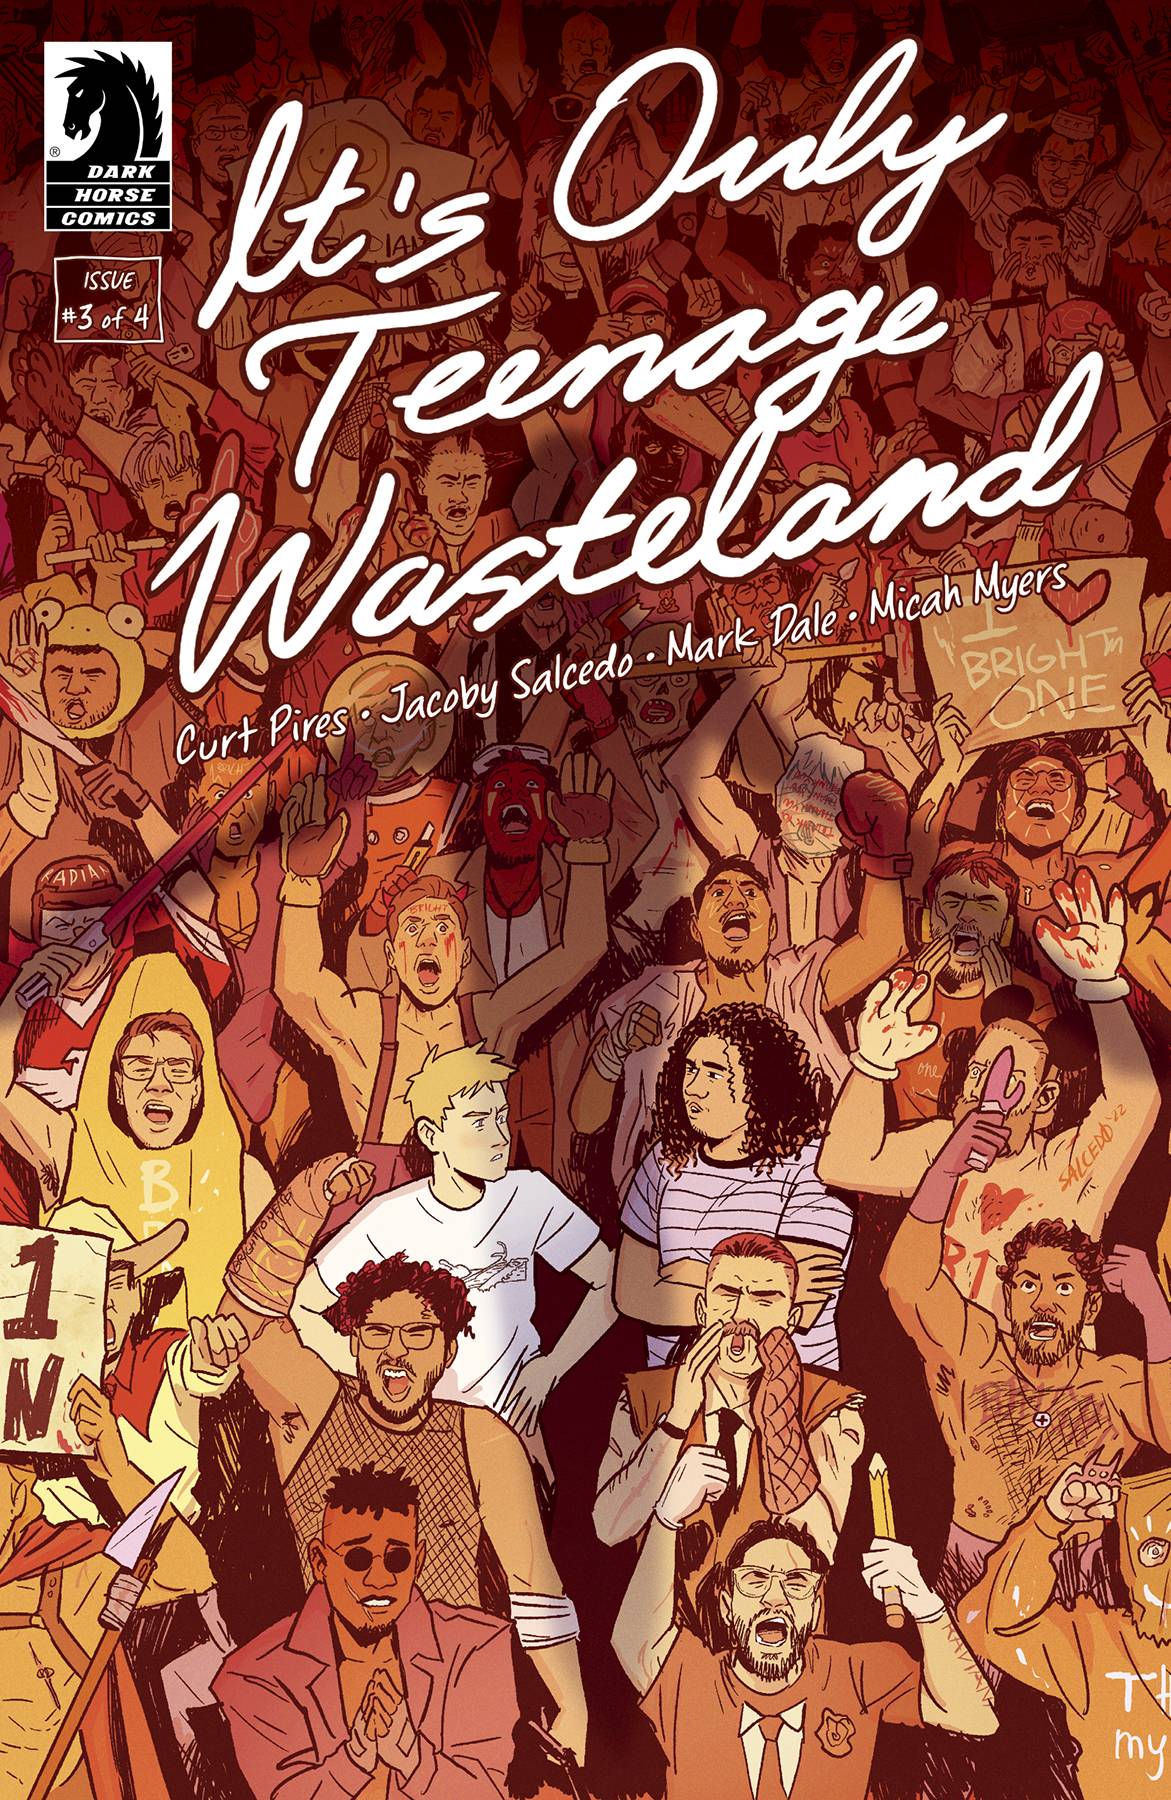 ITS ONLY TEENAGE WASTELAND #3 (OF 4)